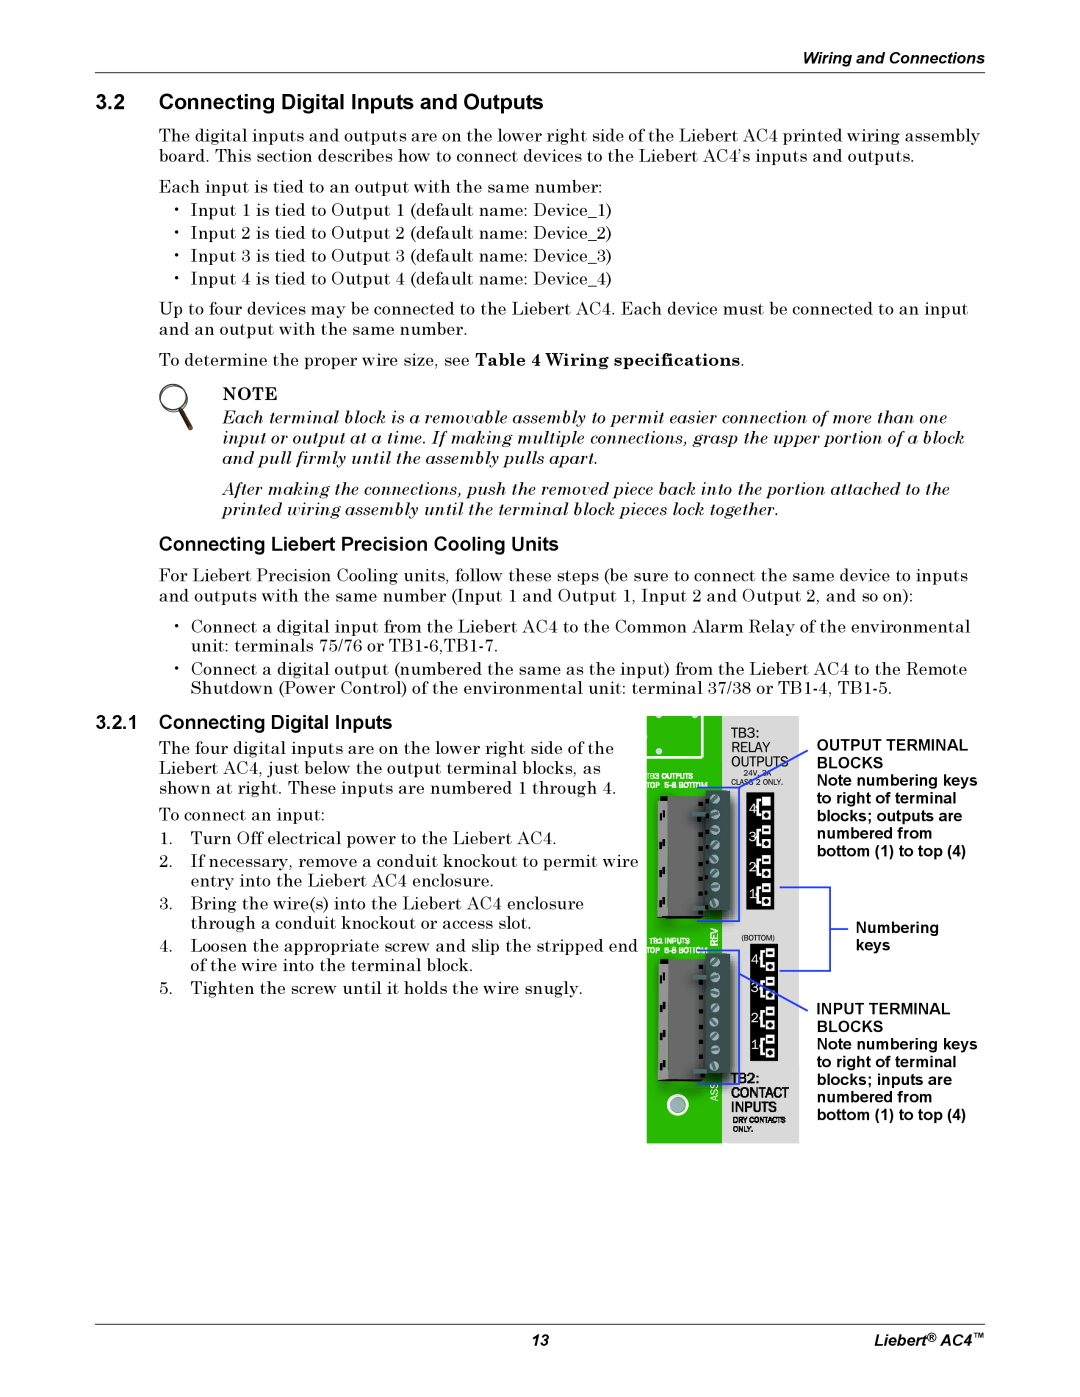 Emerson AC4 user manual 3.2Connecting Digital Inputs and Outputs, Connecting Liebert Precision Cooling Units 